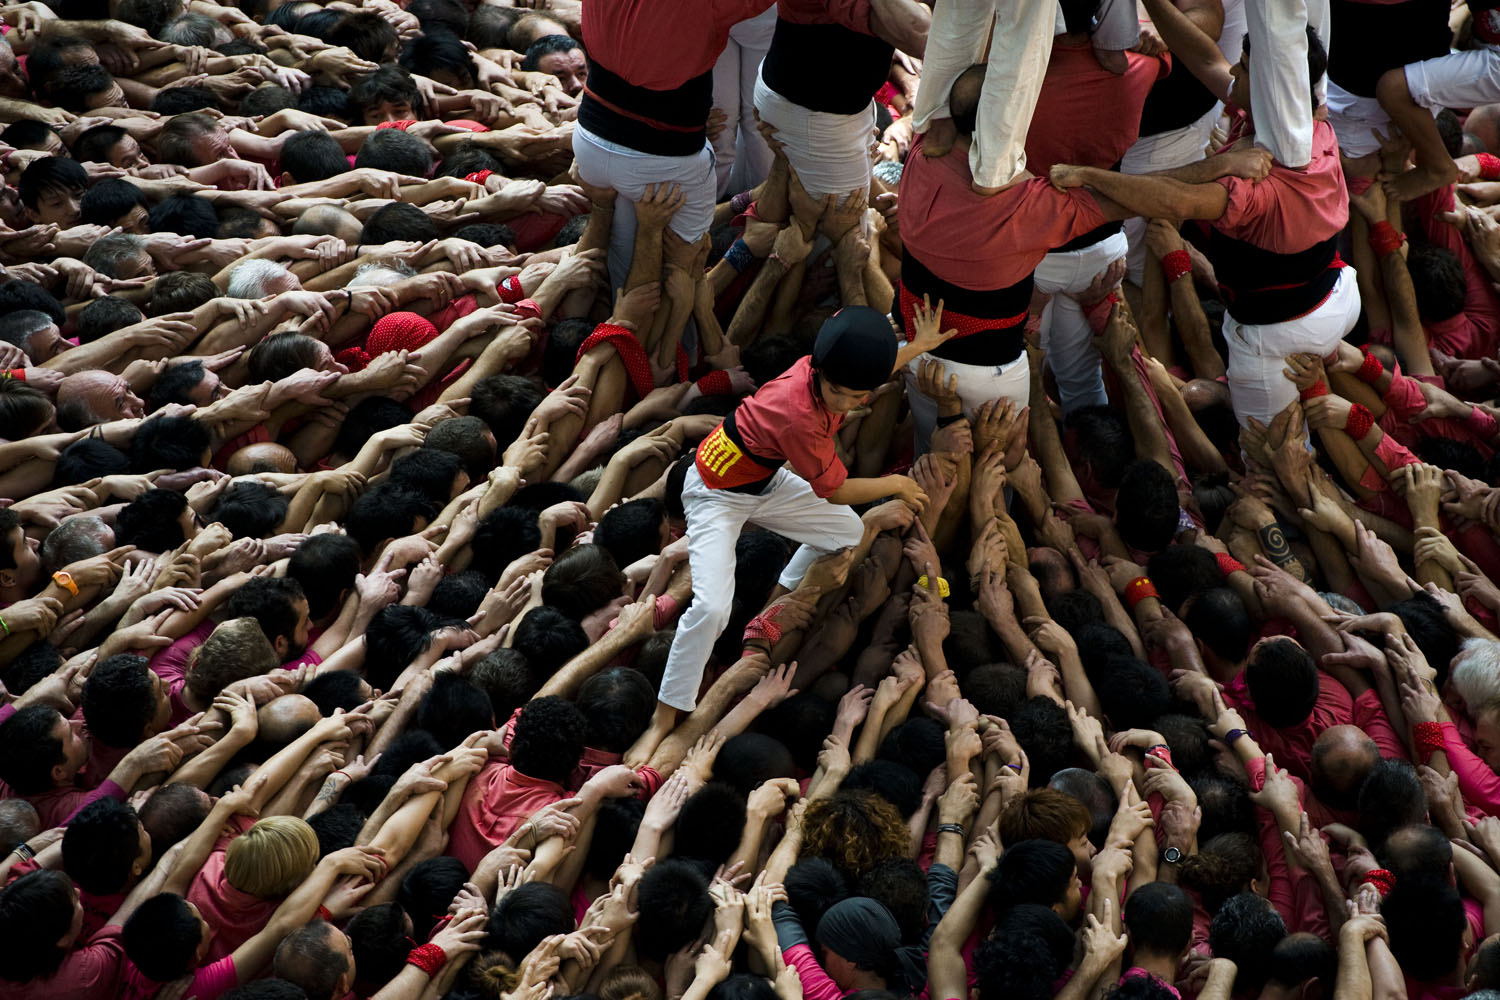 Oct. 7, 2012. A young member of the Colla 'Vella de Valls' descends after bulding a human tower during the 24th Tarragona Castells Competition in Tarragona, Spain.